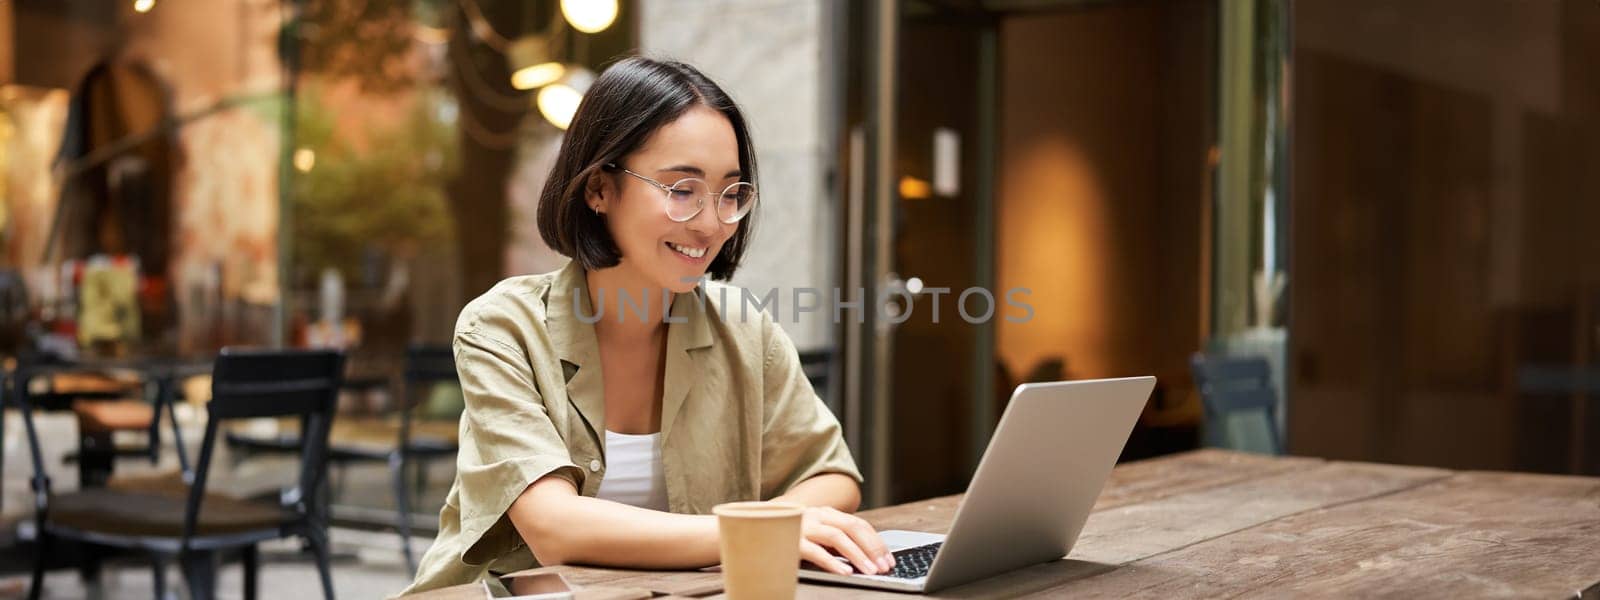 Young woman working in a cafe, using laptop and drinking coffee. Asian girl student with computer studying remotely, sitting on bench near shop.